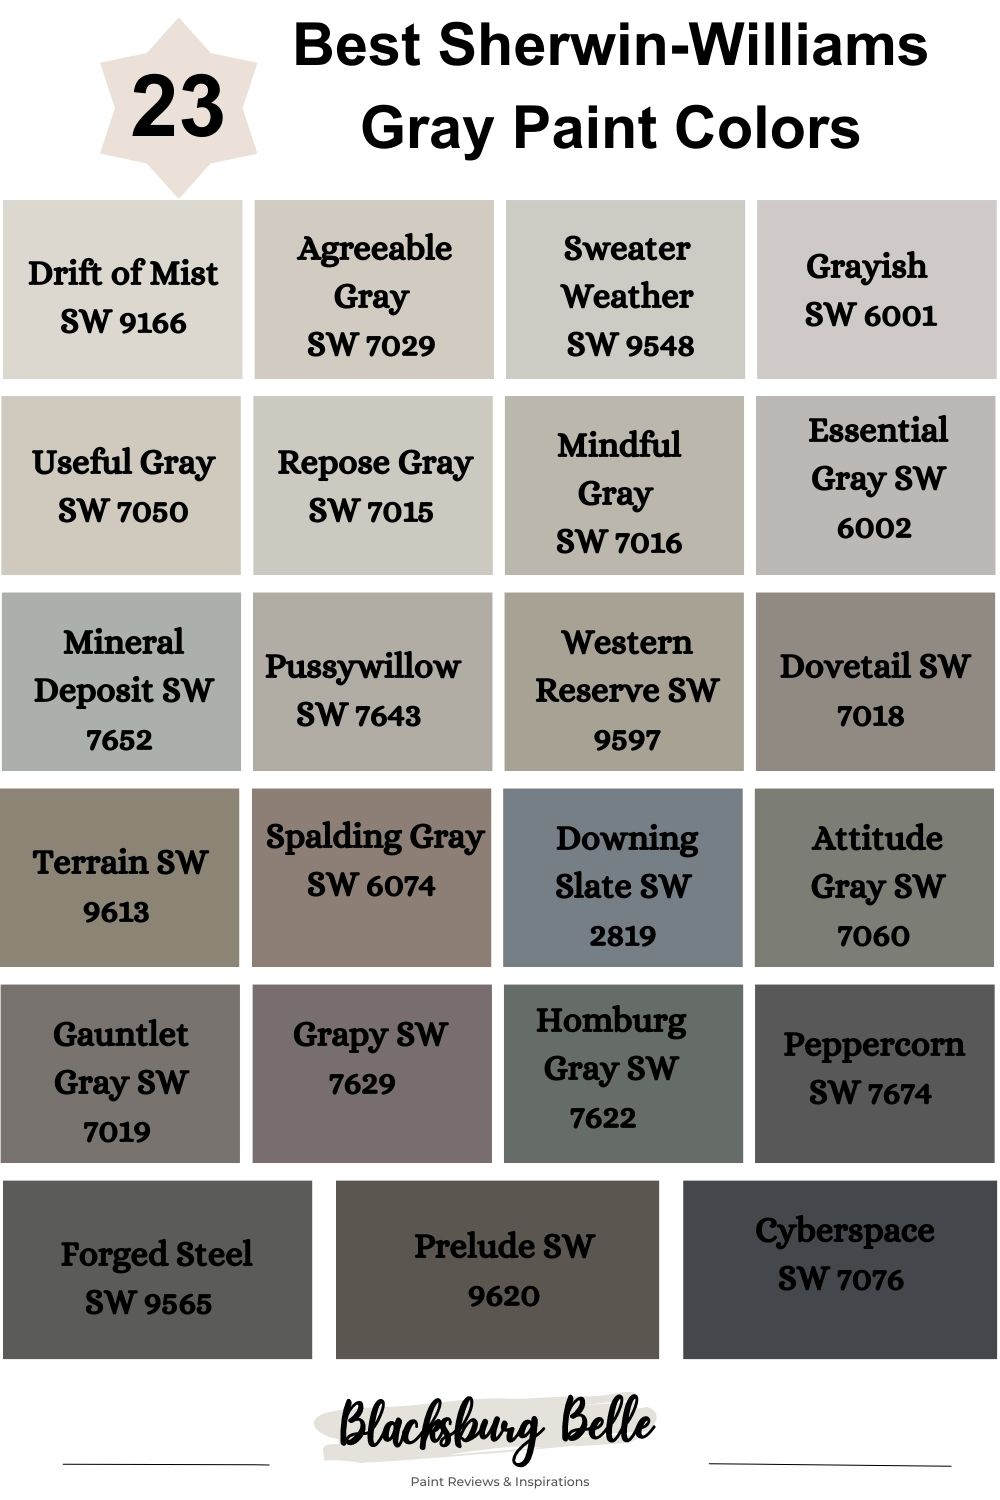 23 Best Sherwin-Williams Gray Paint Colors (Trend 2023)